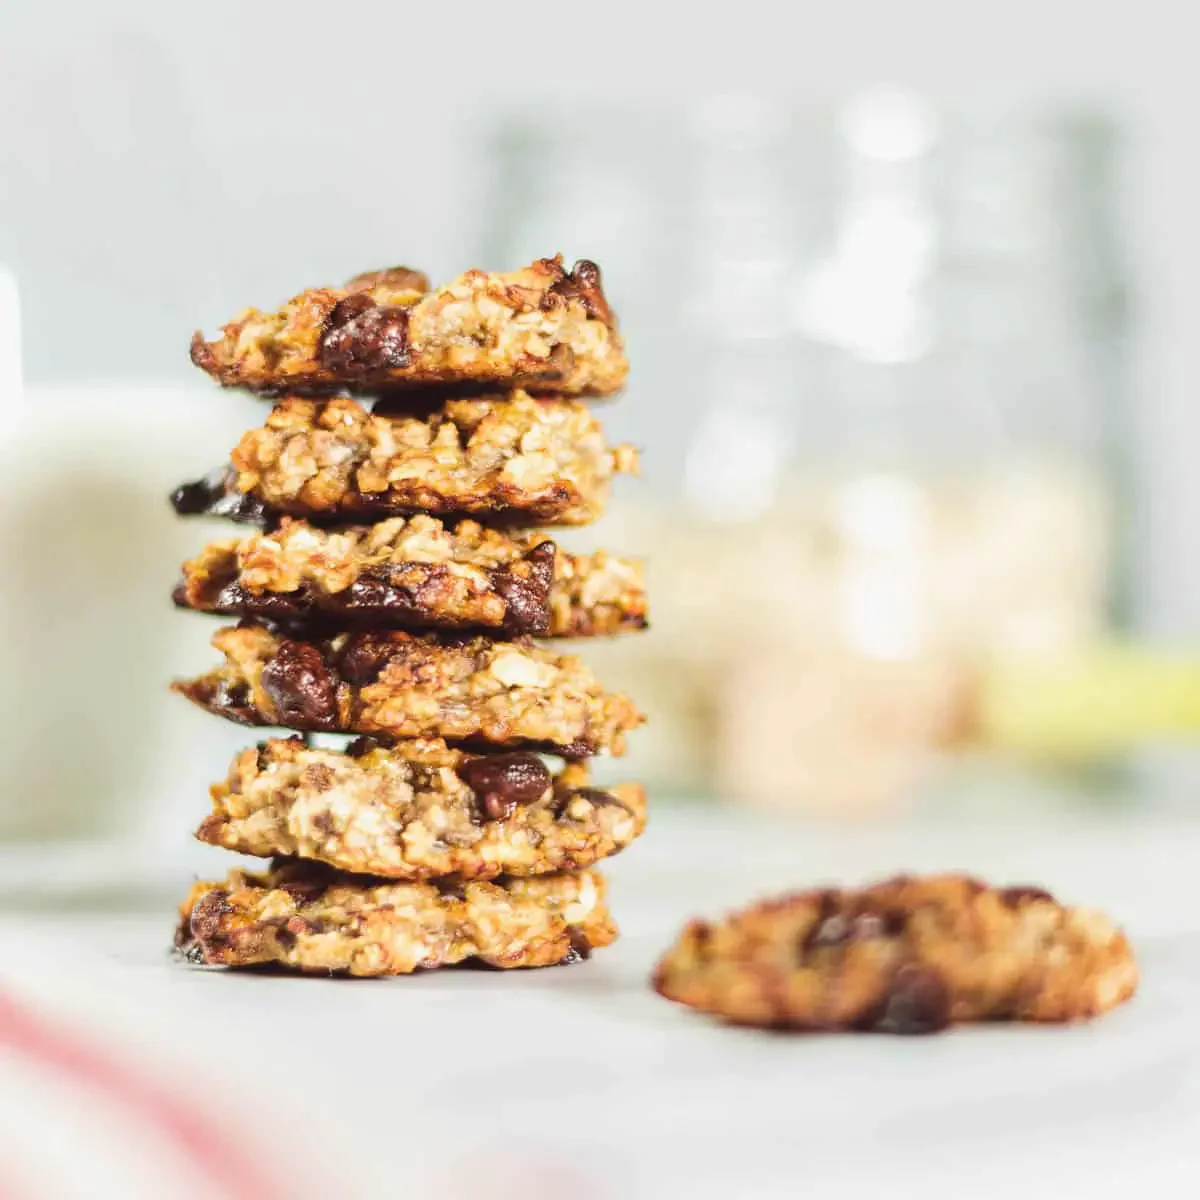 【Only 3 ingredients】 Banana Oatmeal Cookies